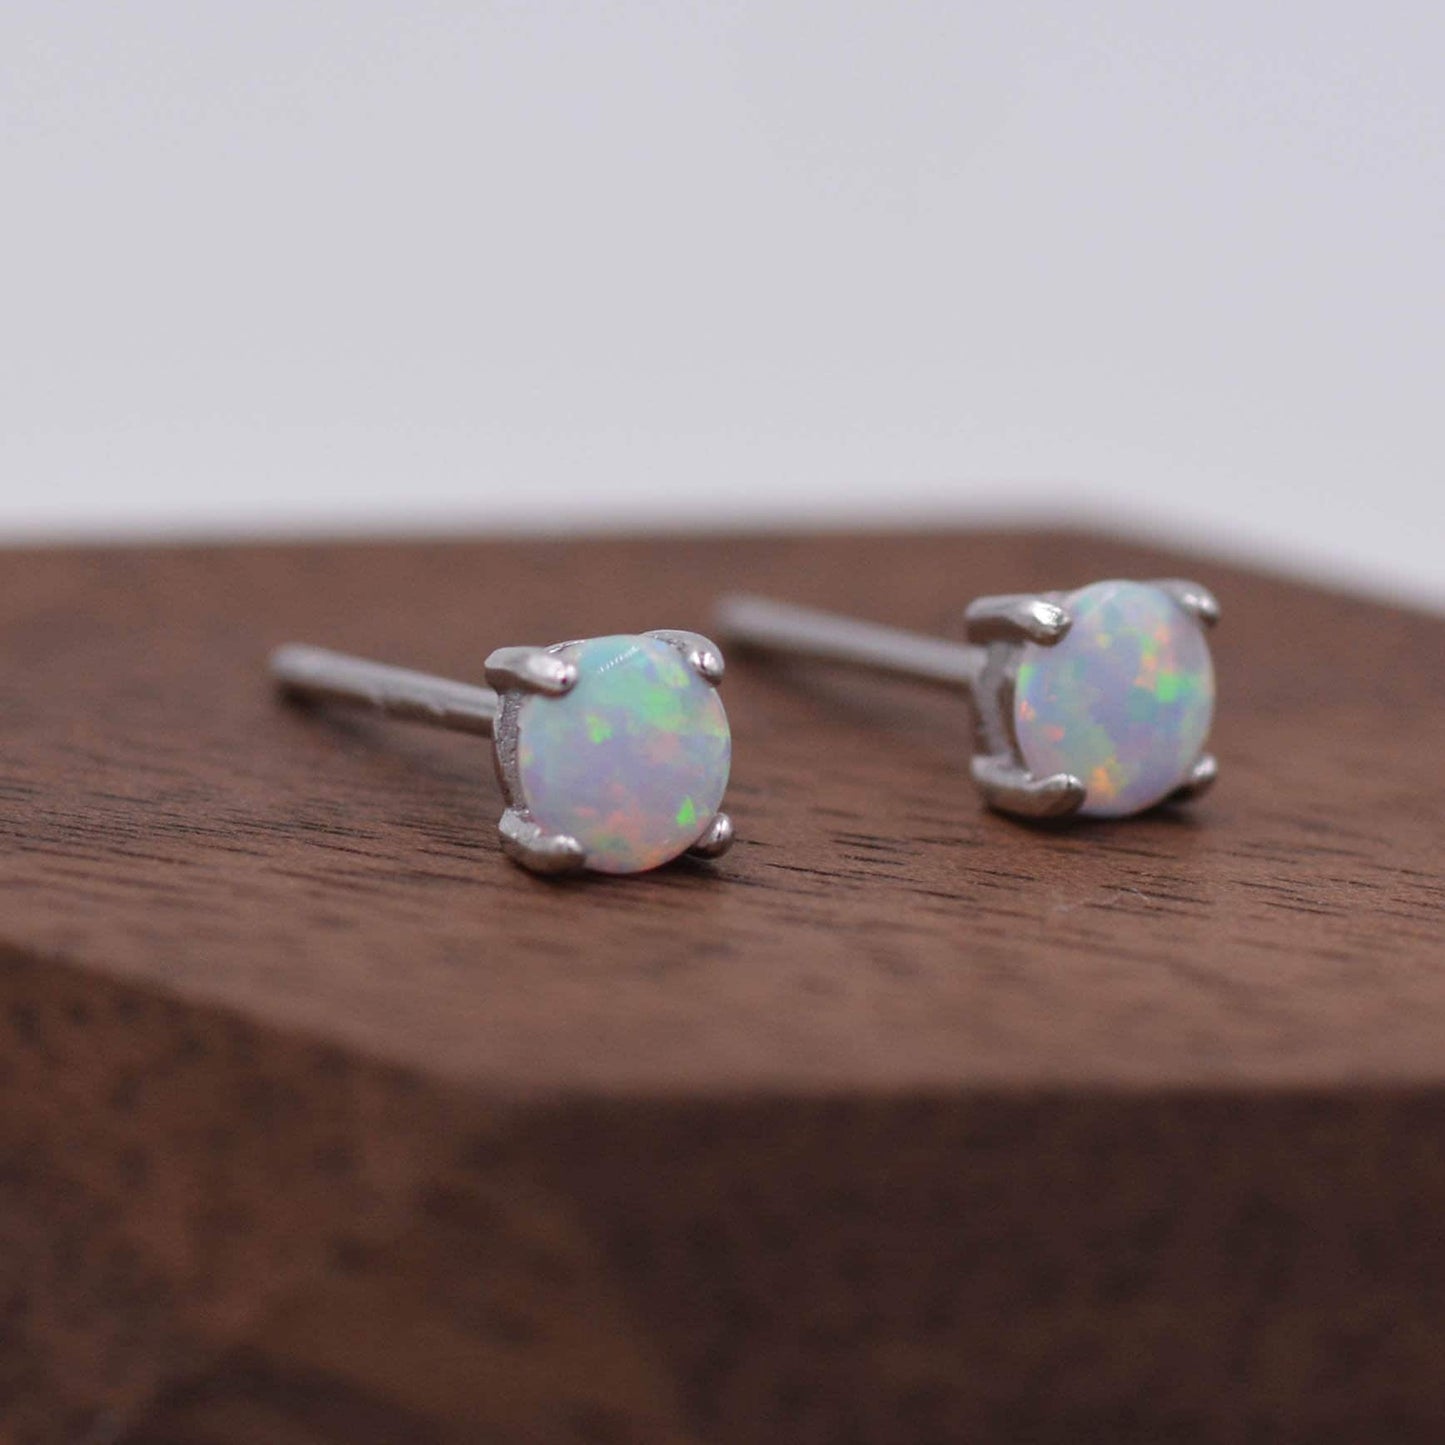 Minimalist Opal Stud Earrings in Sterling Silver, Simulated White Opal, Tiny Circle Dot Jewellery E20